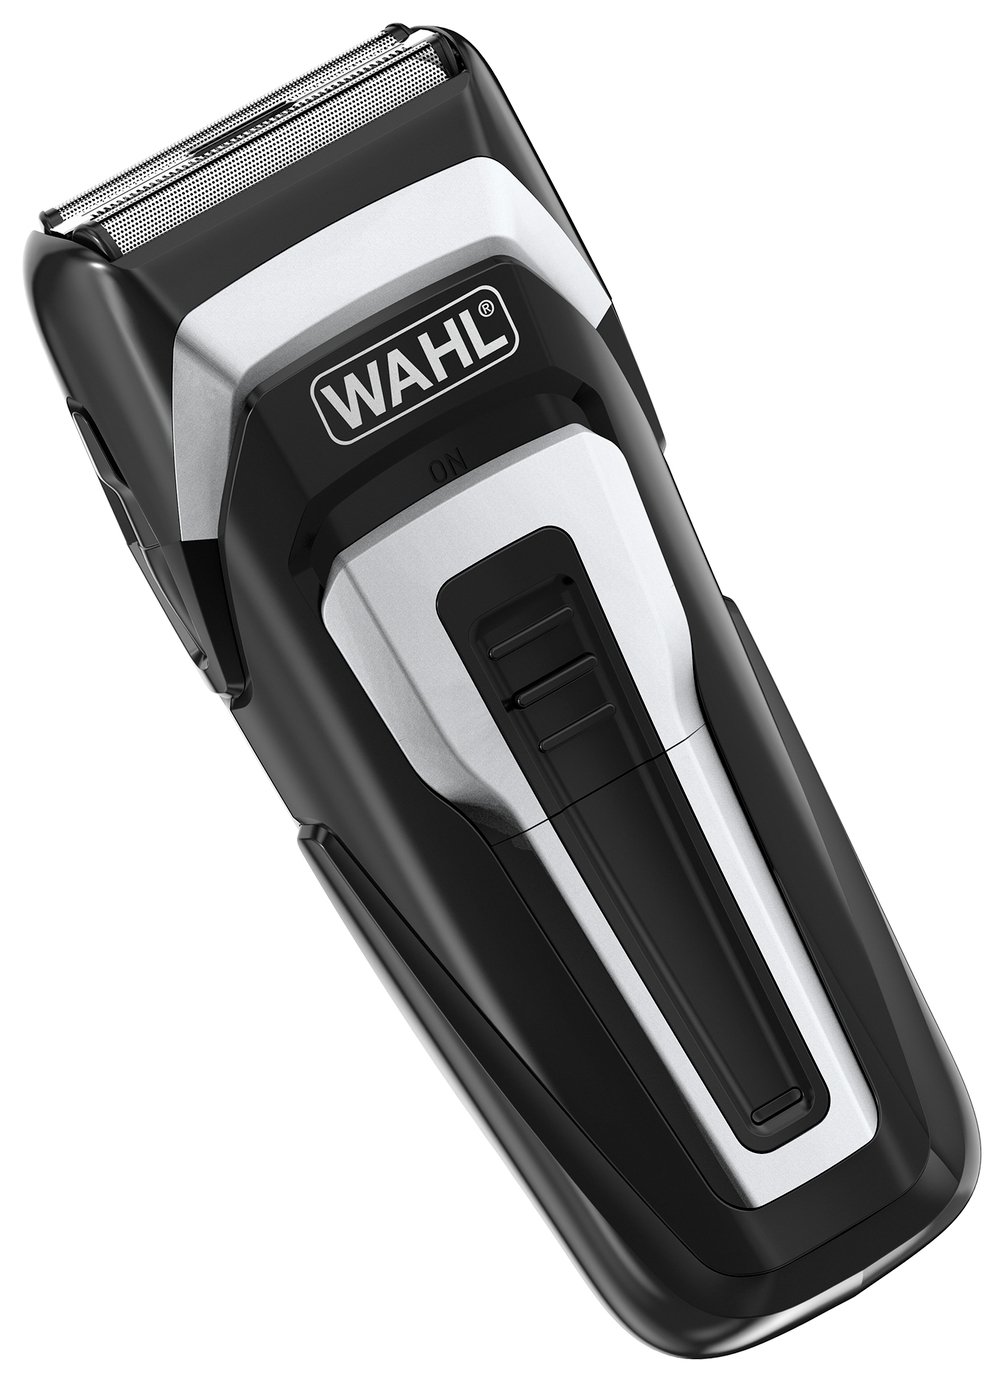 Wahl Ultima Plus Electric Shaver